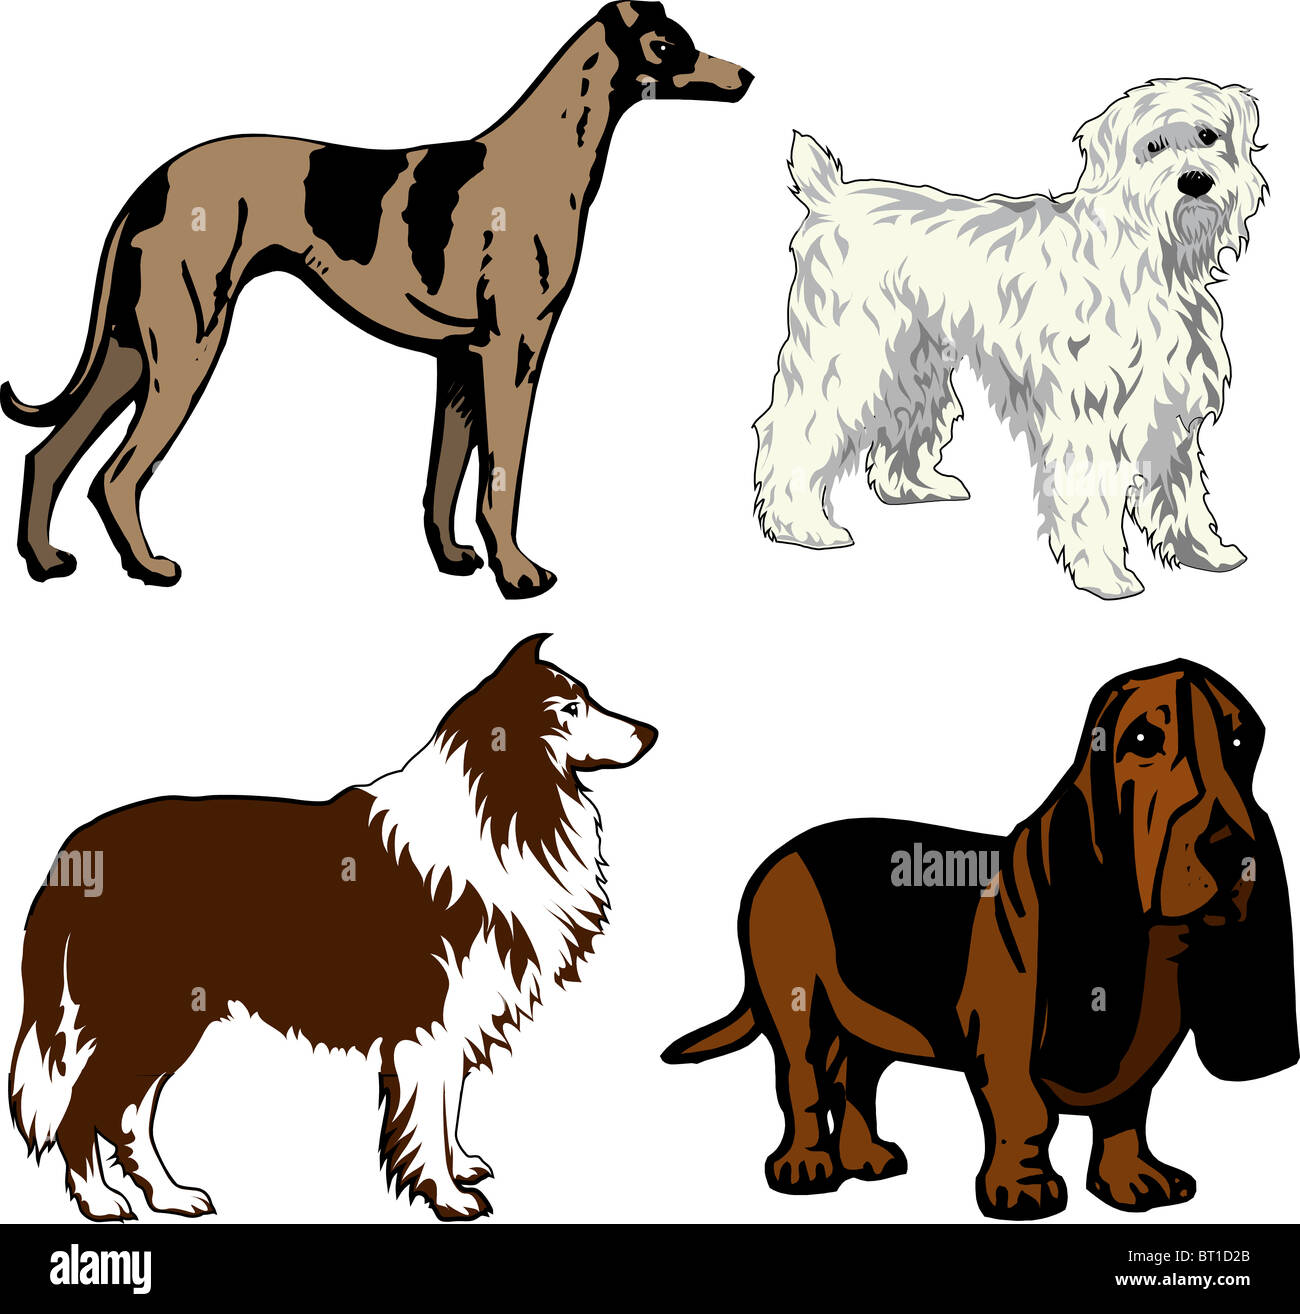 Vector Illustration of 4 different dogs. Dogs2 Stock Photo